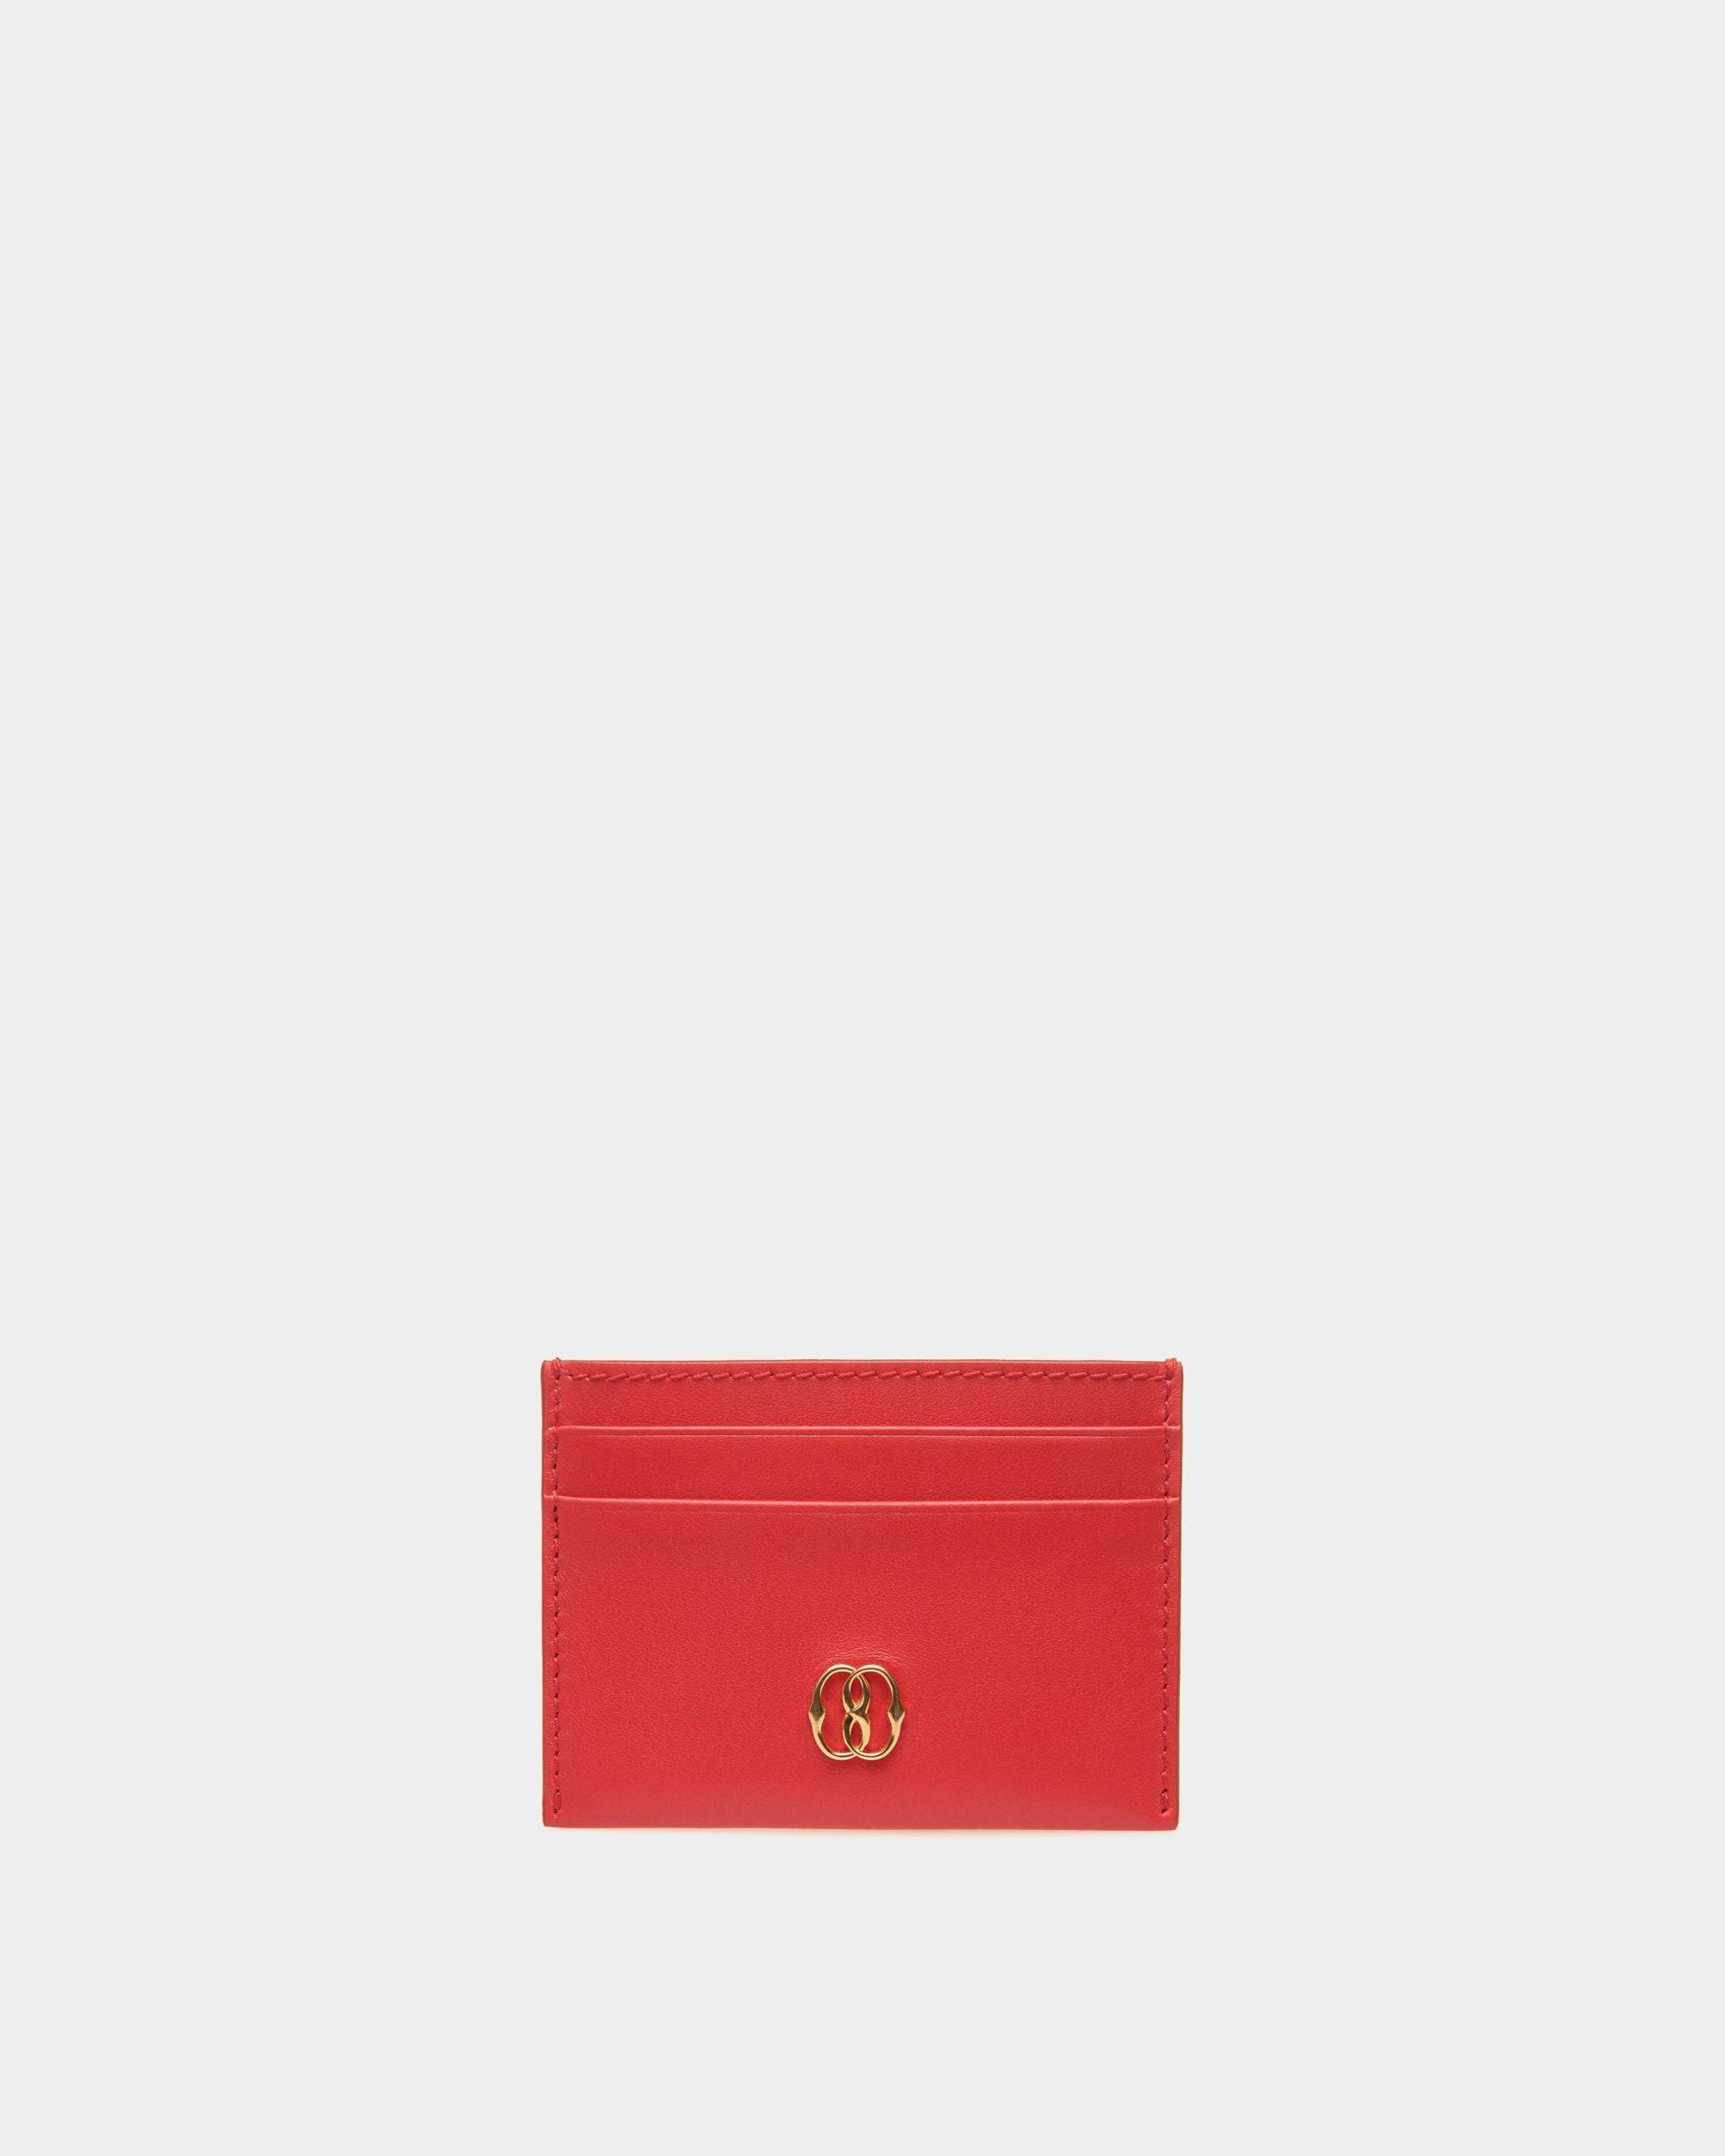 Women's Emblem Card Holder in Red Leather | Bally | Still Life Front